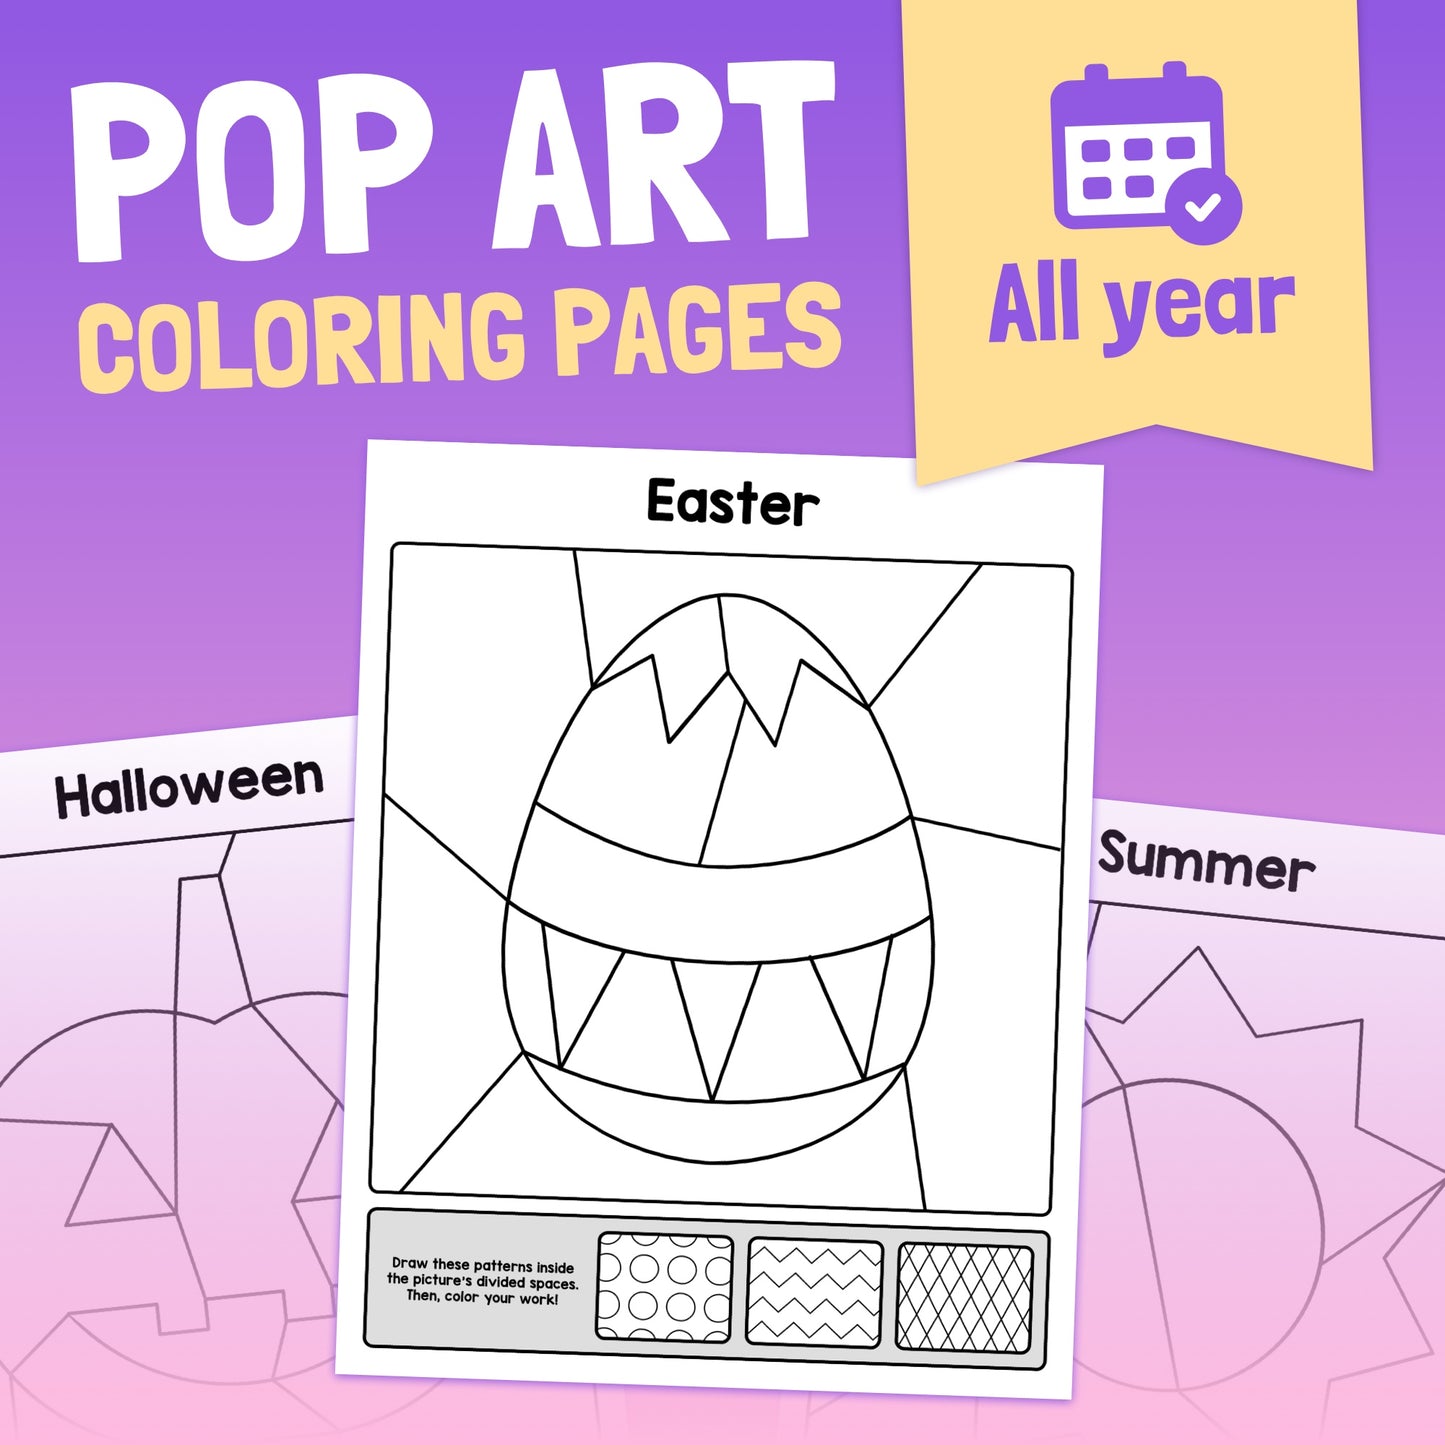 All year pop art coloring pages